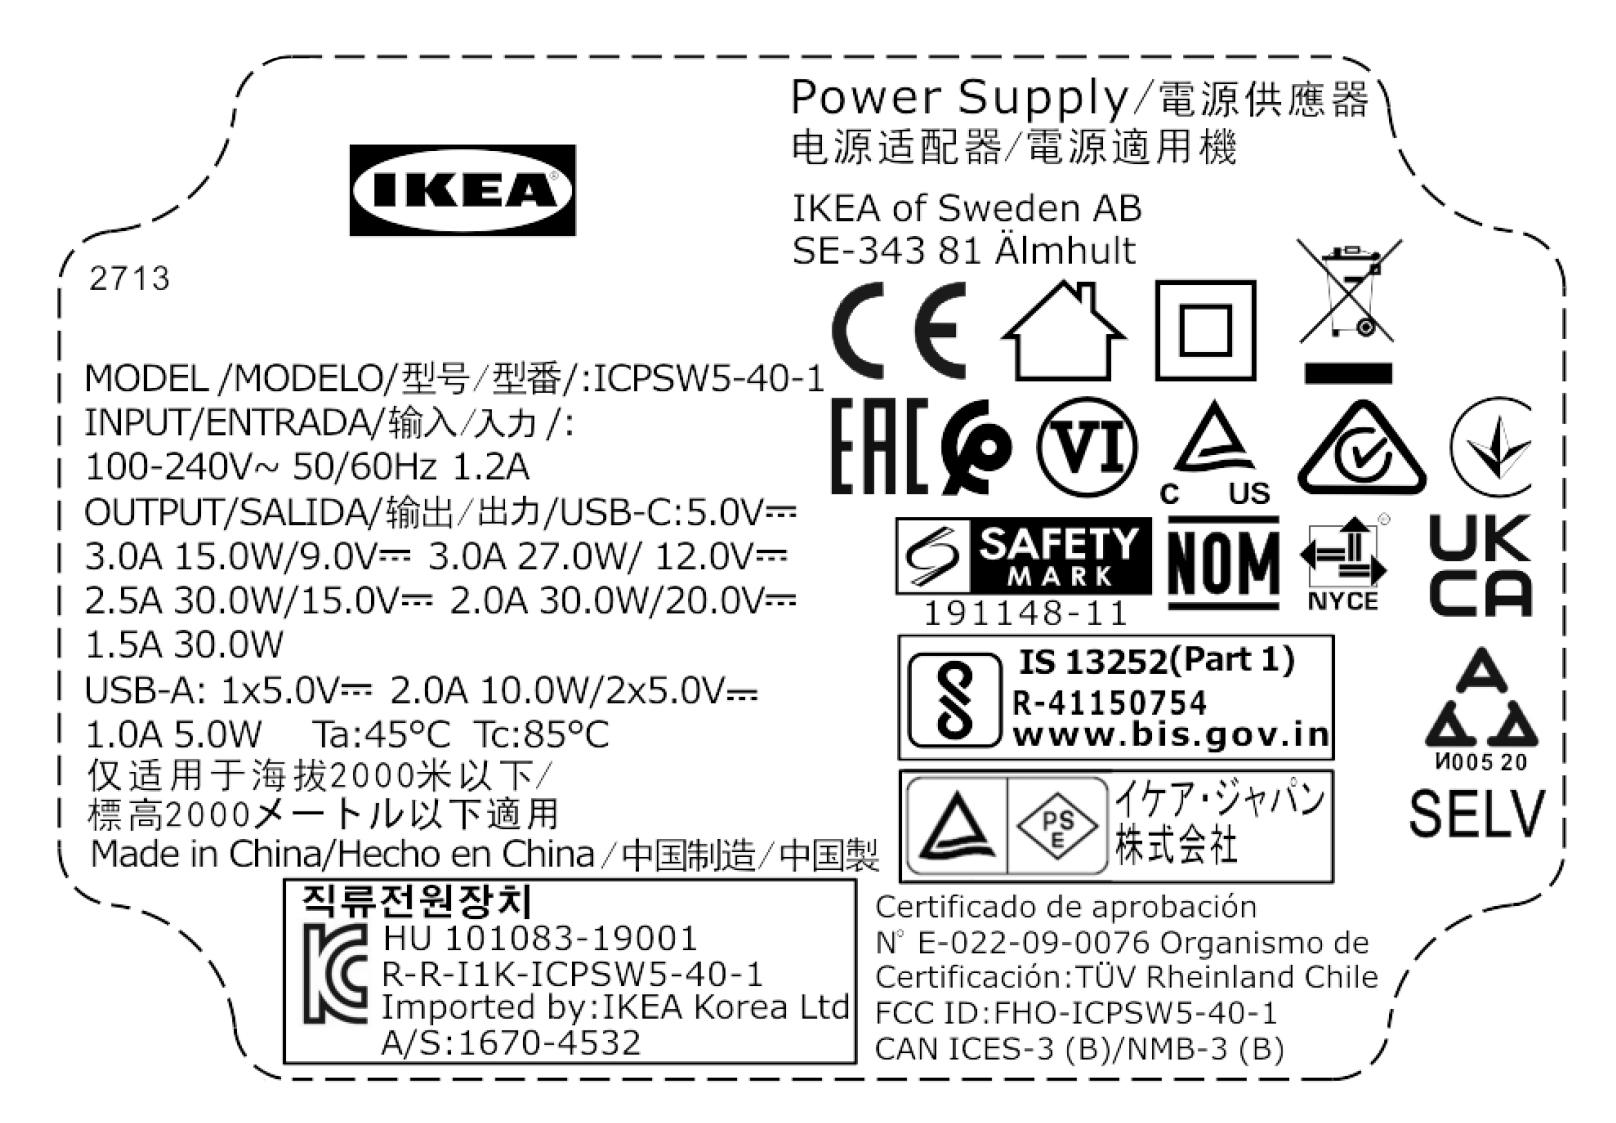 The Electrical and Mechanical Services Department today (January 10) urged the public to stop using a model of IKEA ÅSKSTORM 40W USB charger. Photo shows the product label on the back of the charger.